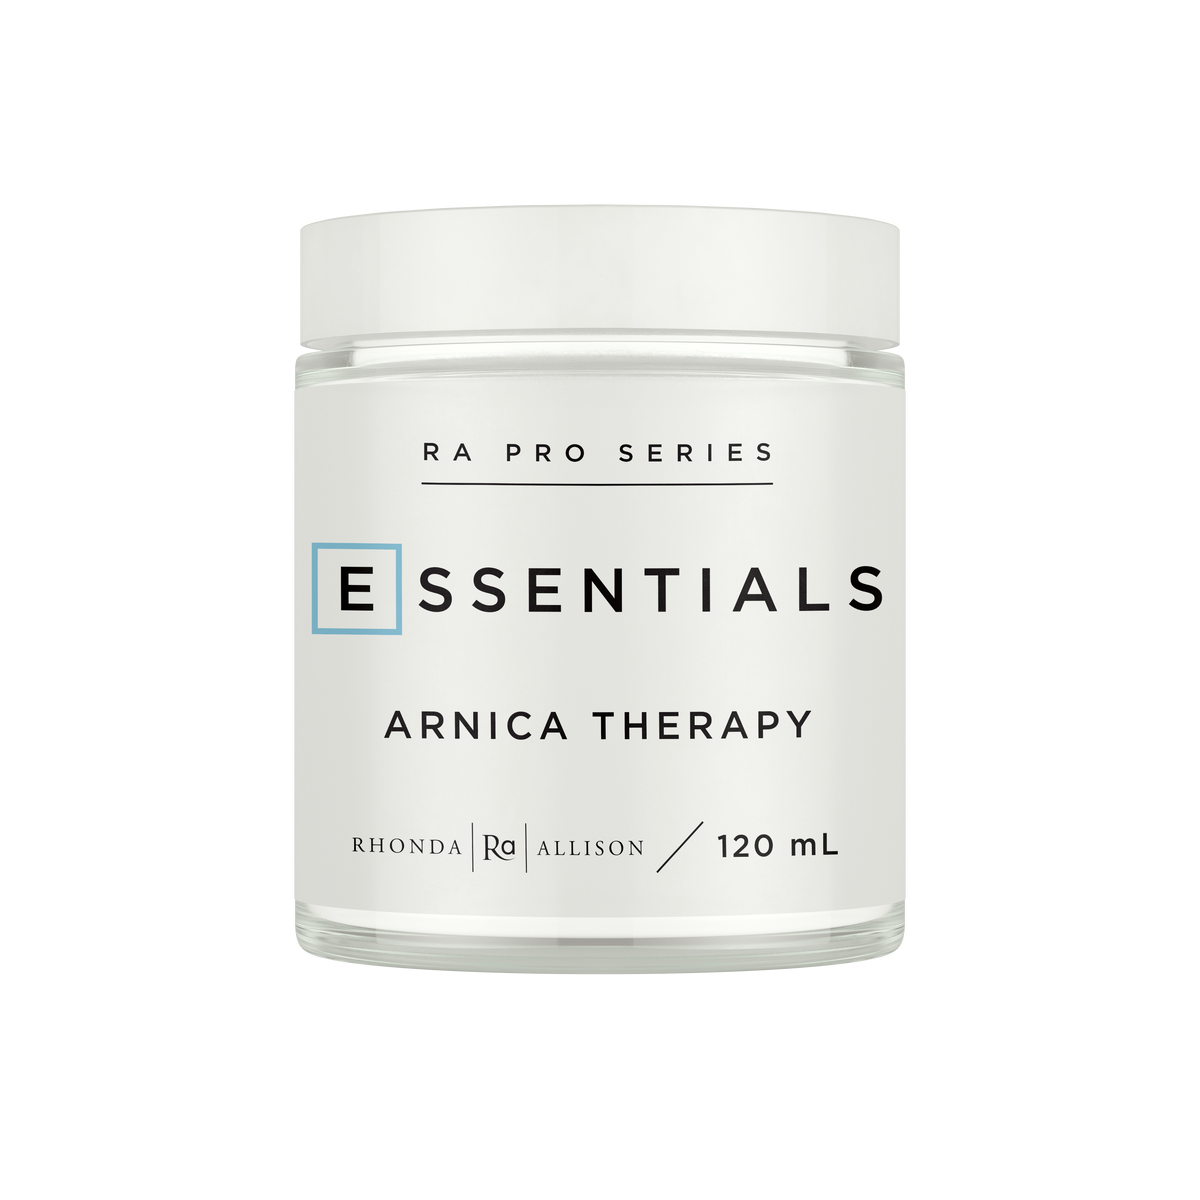 Arnica Therapy